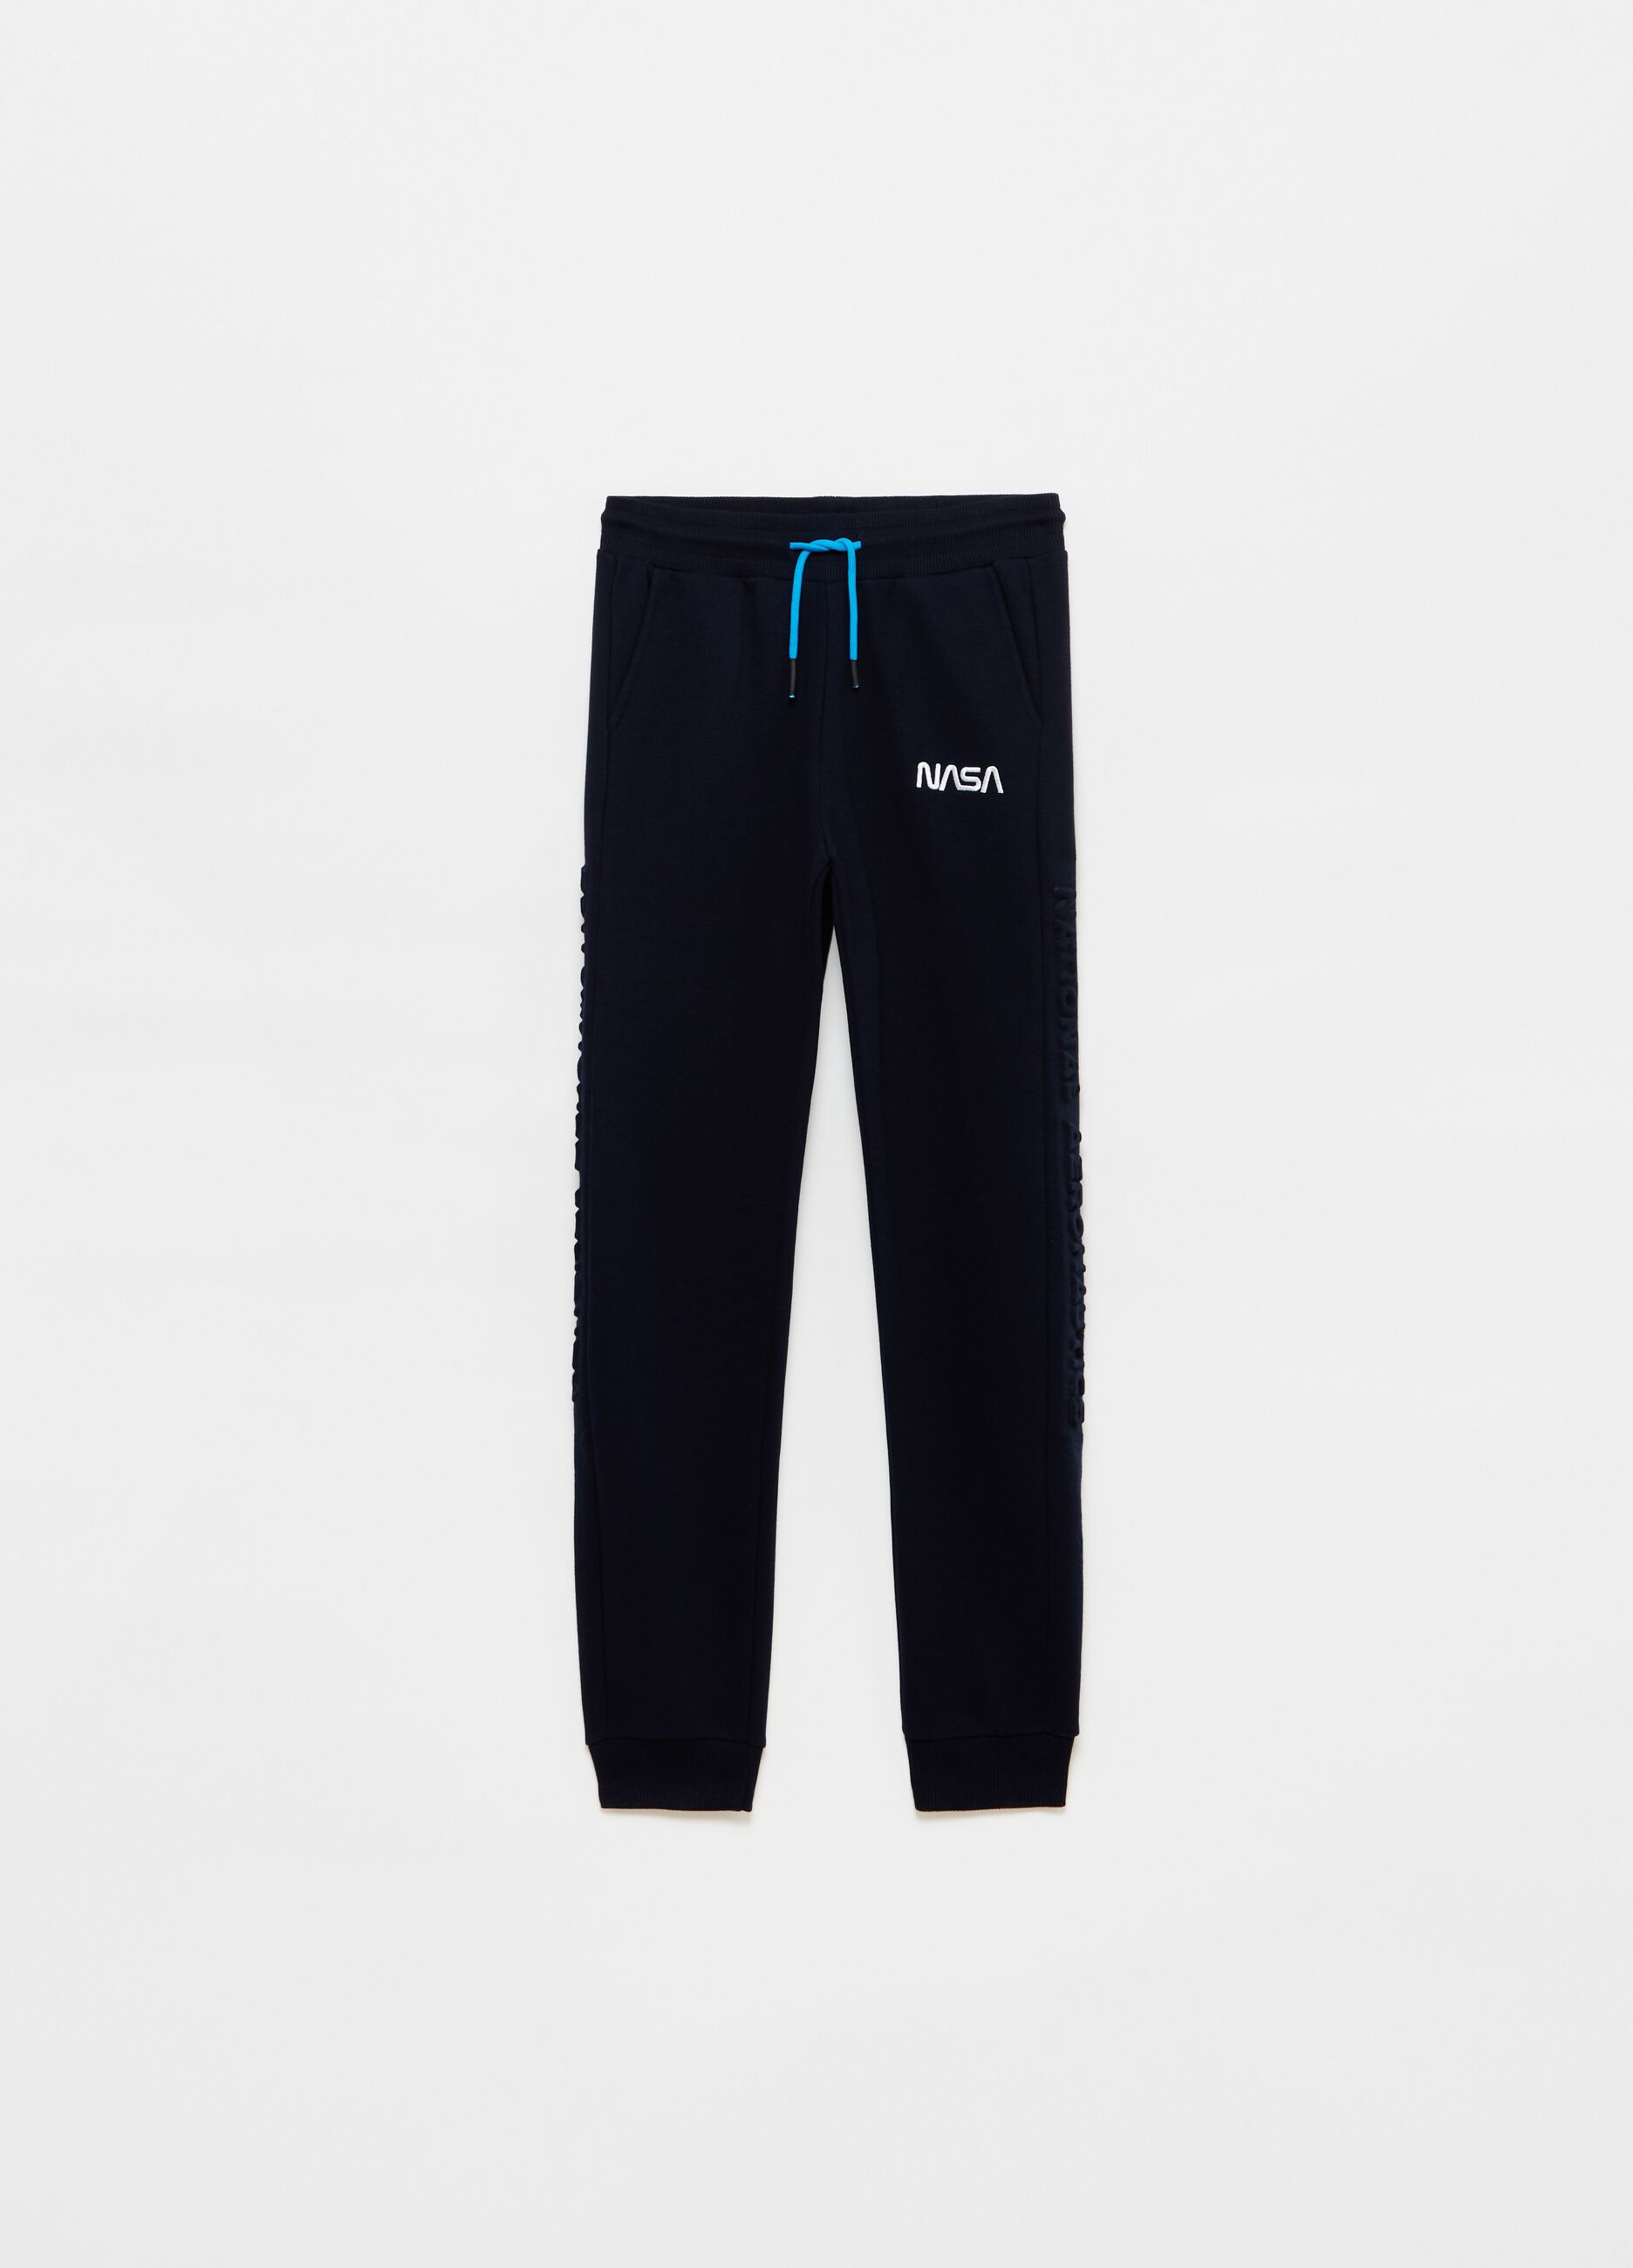 Joggers with raised NASA lettering